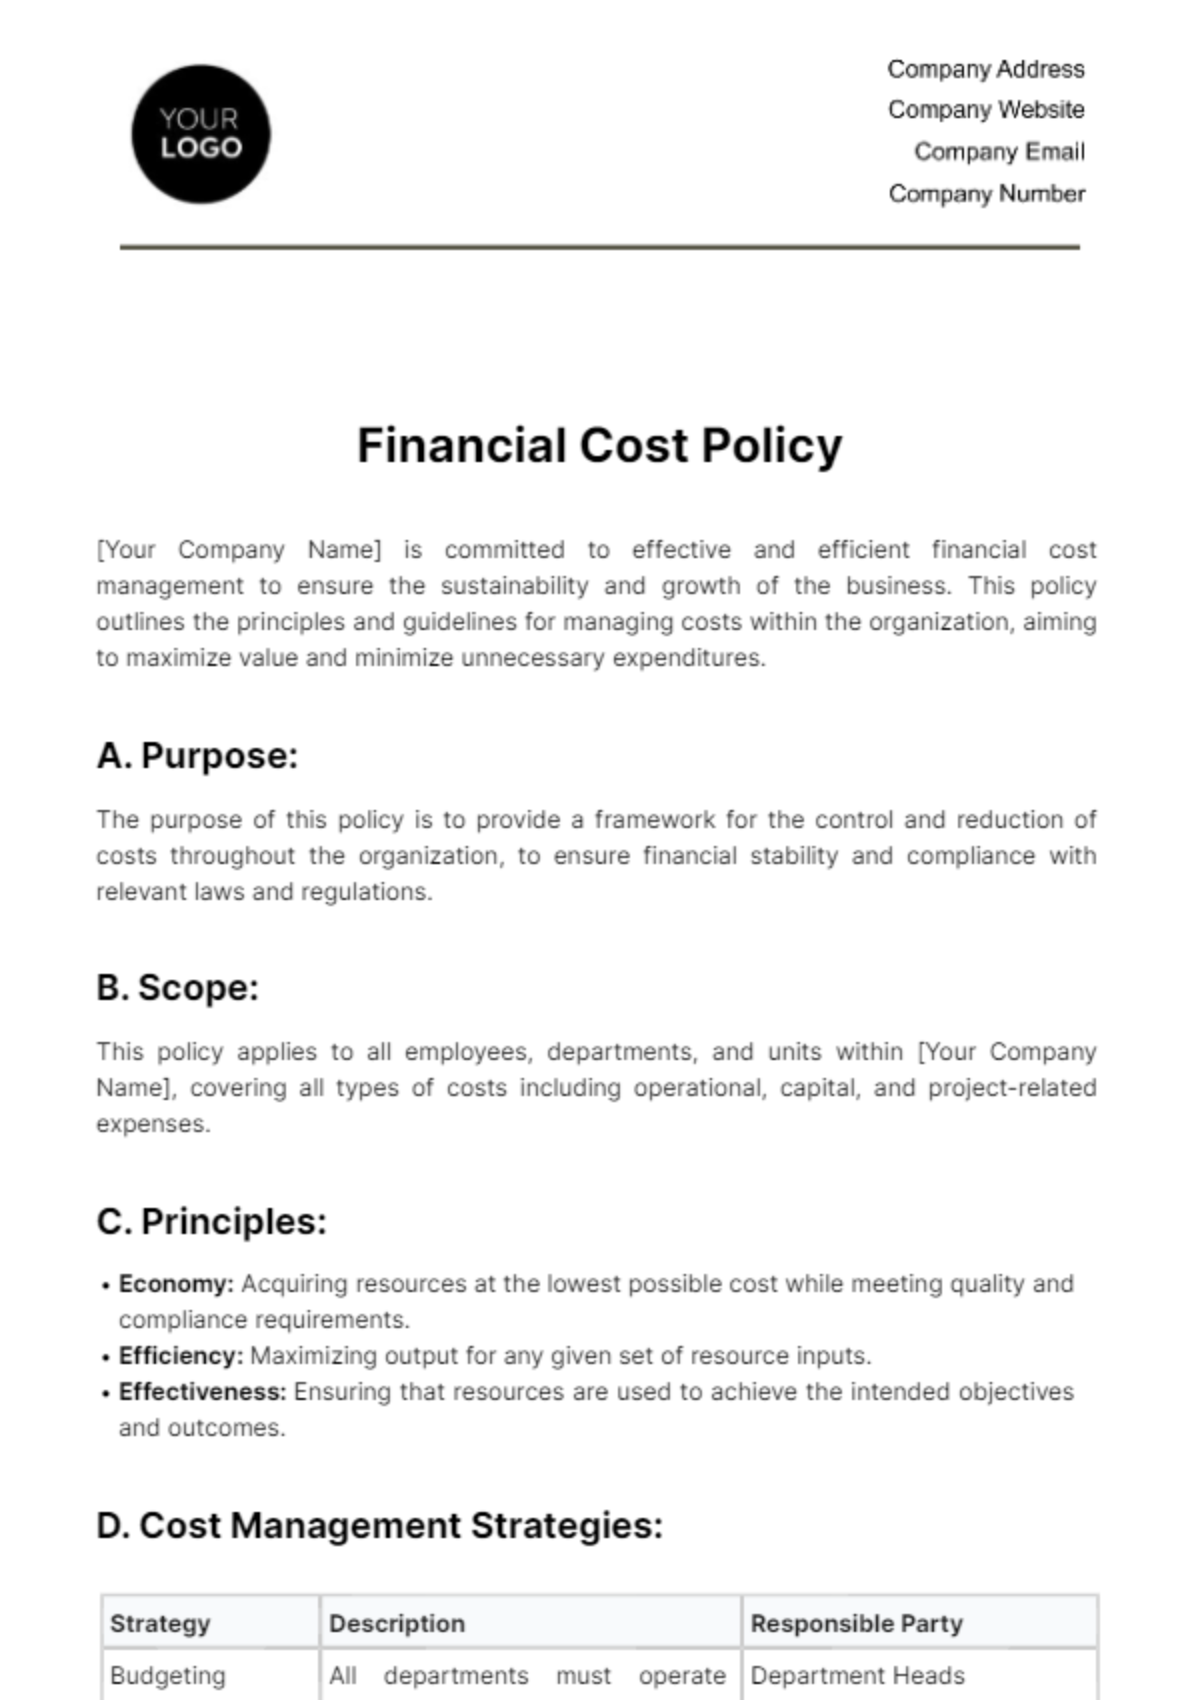 Financial Cost Policy Template